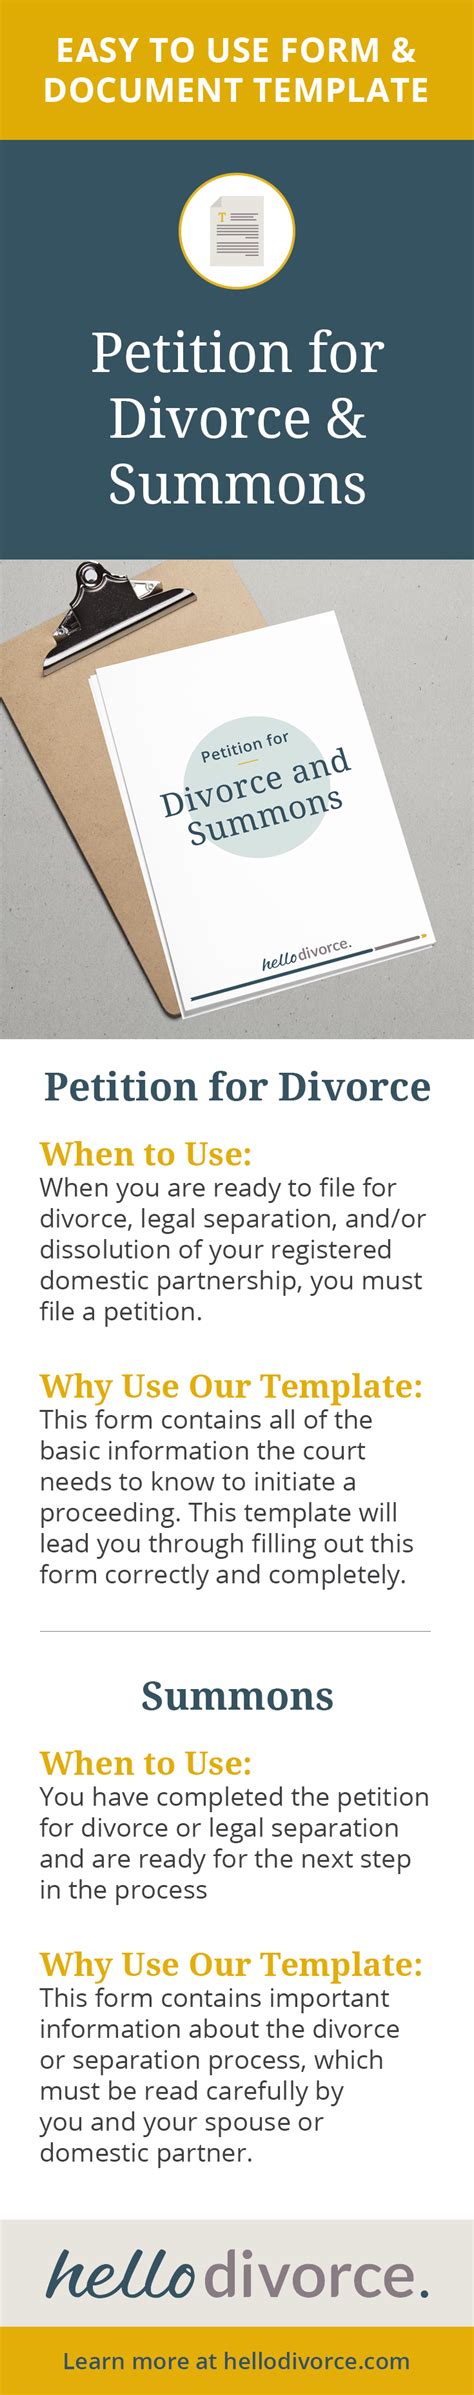 It is illegal for one spouse to hide marital assets to the detriment of the other. These are the forms you need to complete to get your divorce underway. We help you do it ...